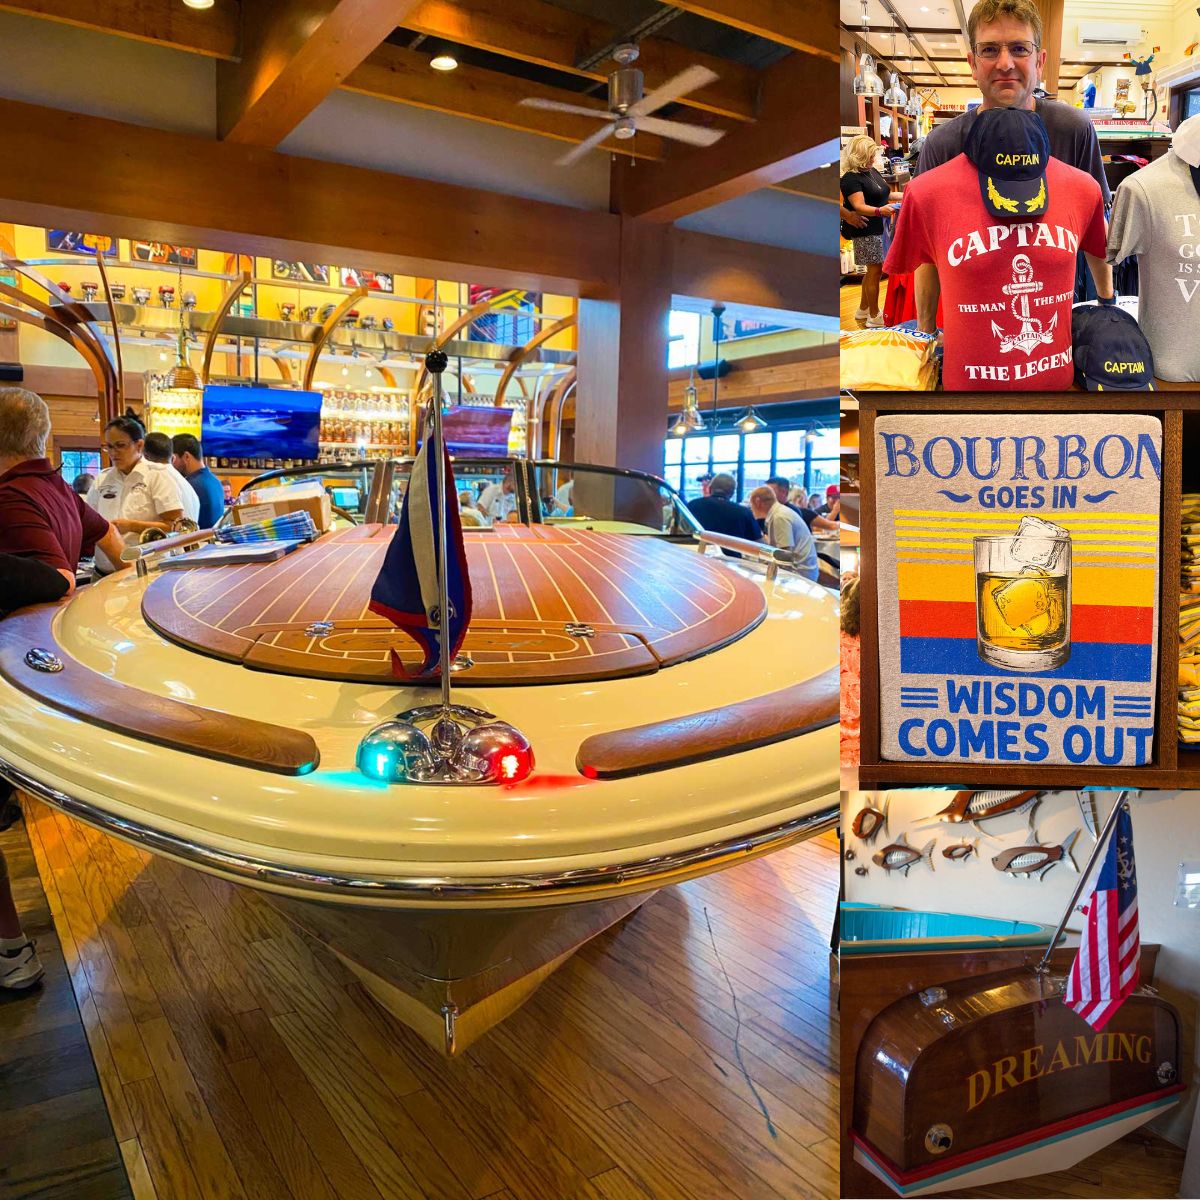 A boat shaped table and photos of items from the gift shop.